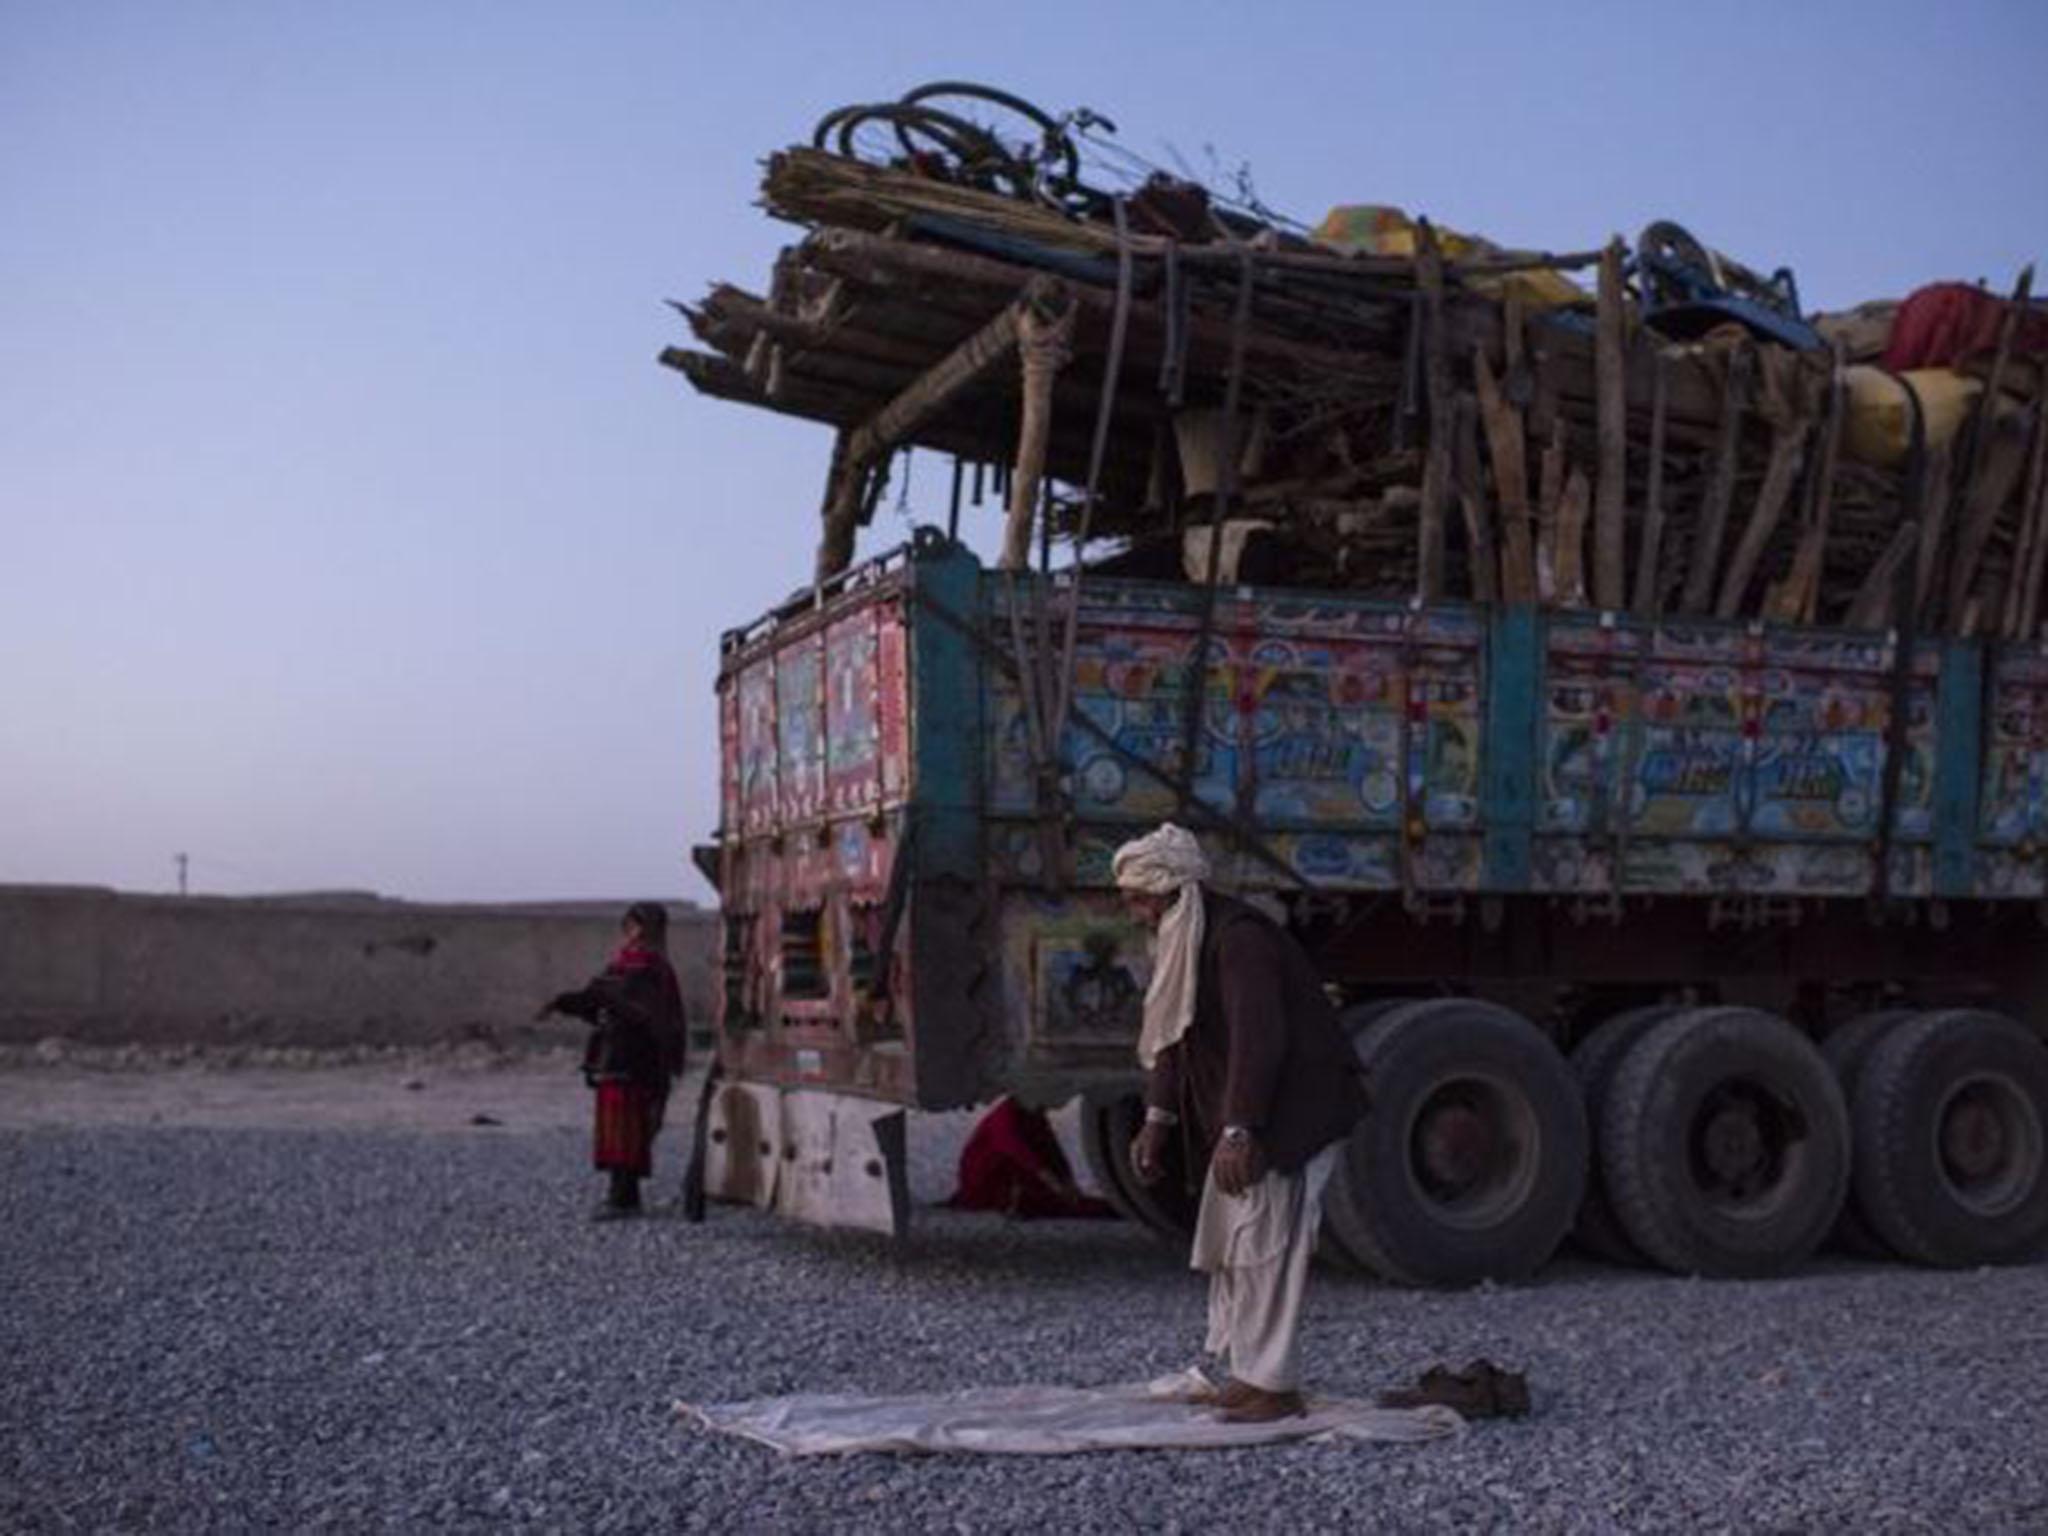 A man prays beside the truck that carried him and his family to the centre